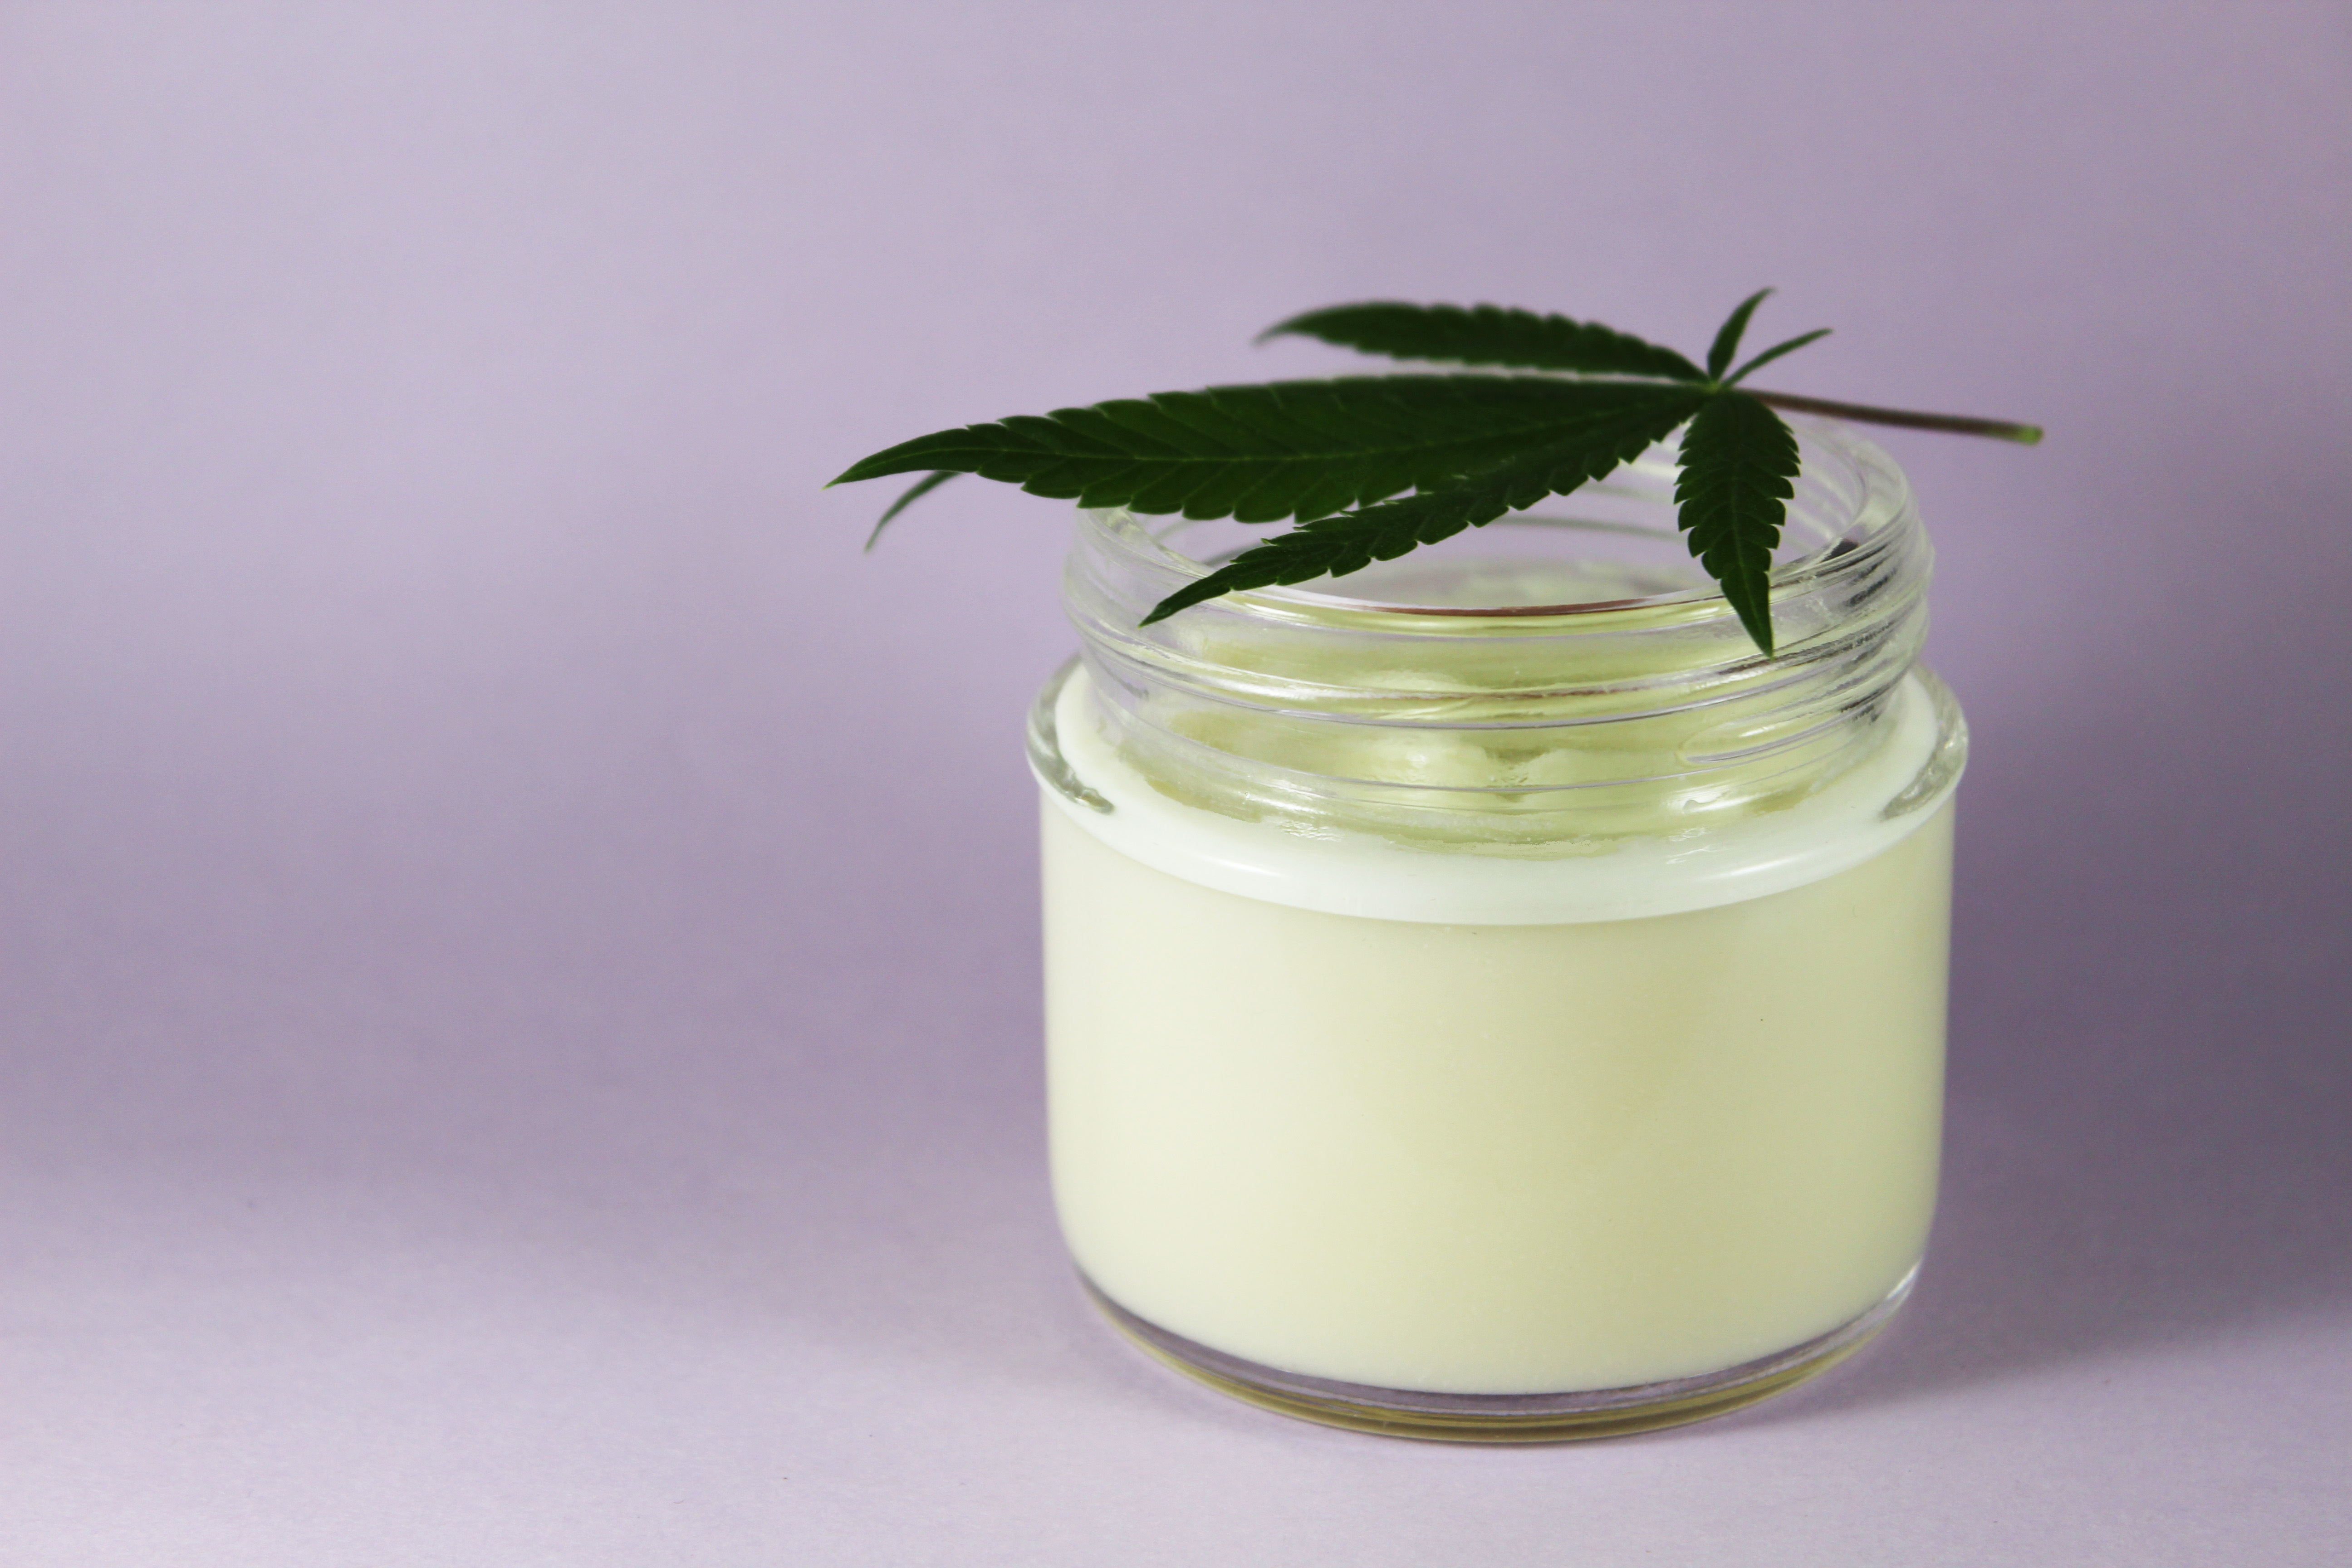 You Know CBD is in Vogue, but What Do People Really Think?